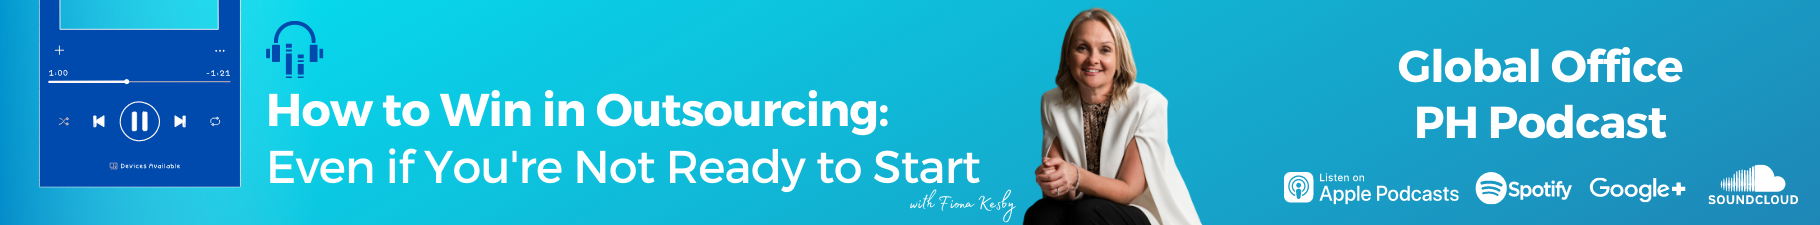 How to Win in Outsourcing Even if You're Not Ready to Start